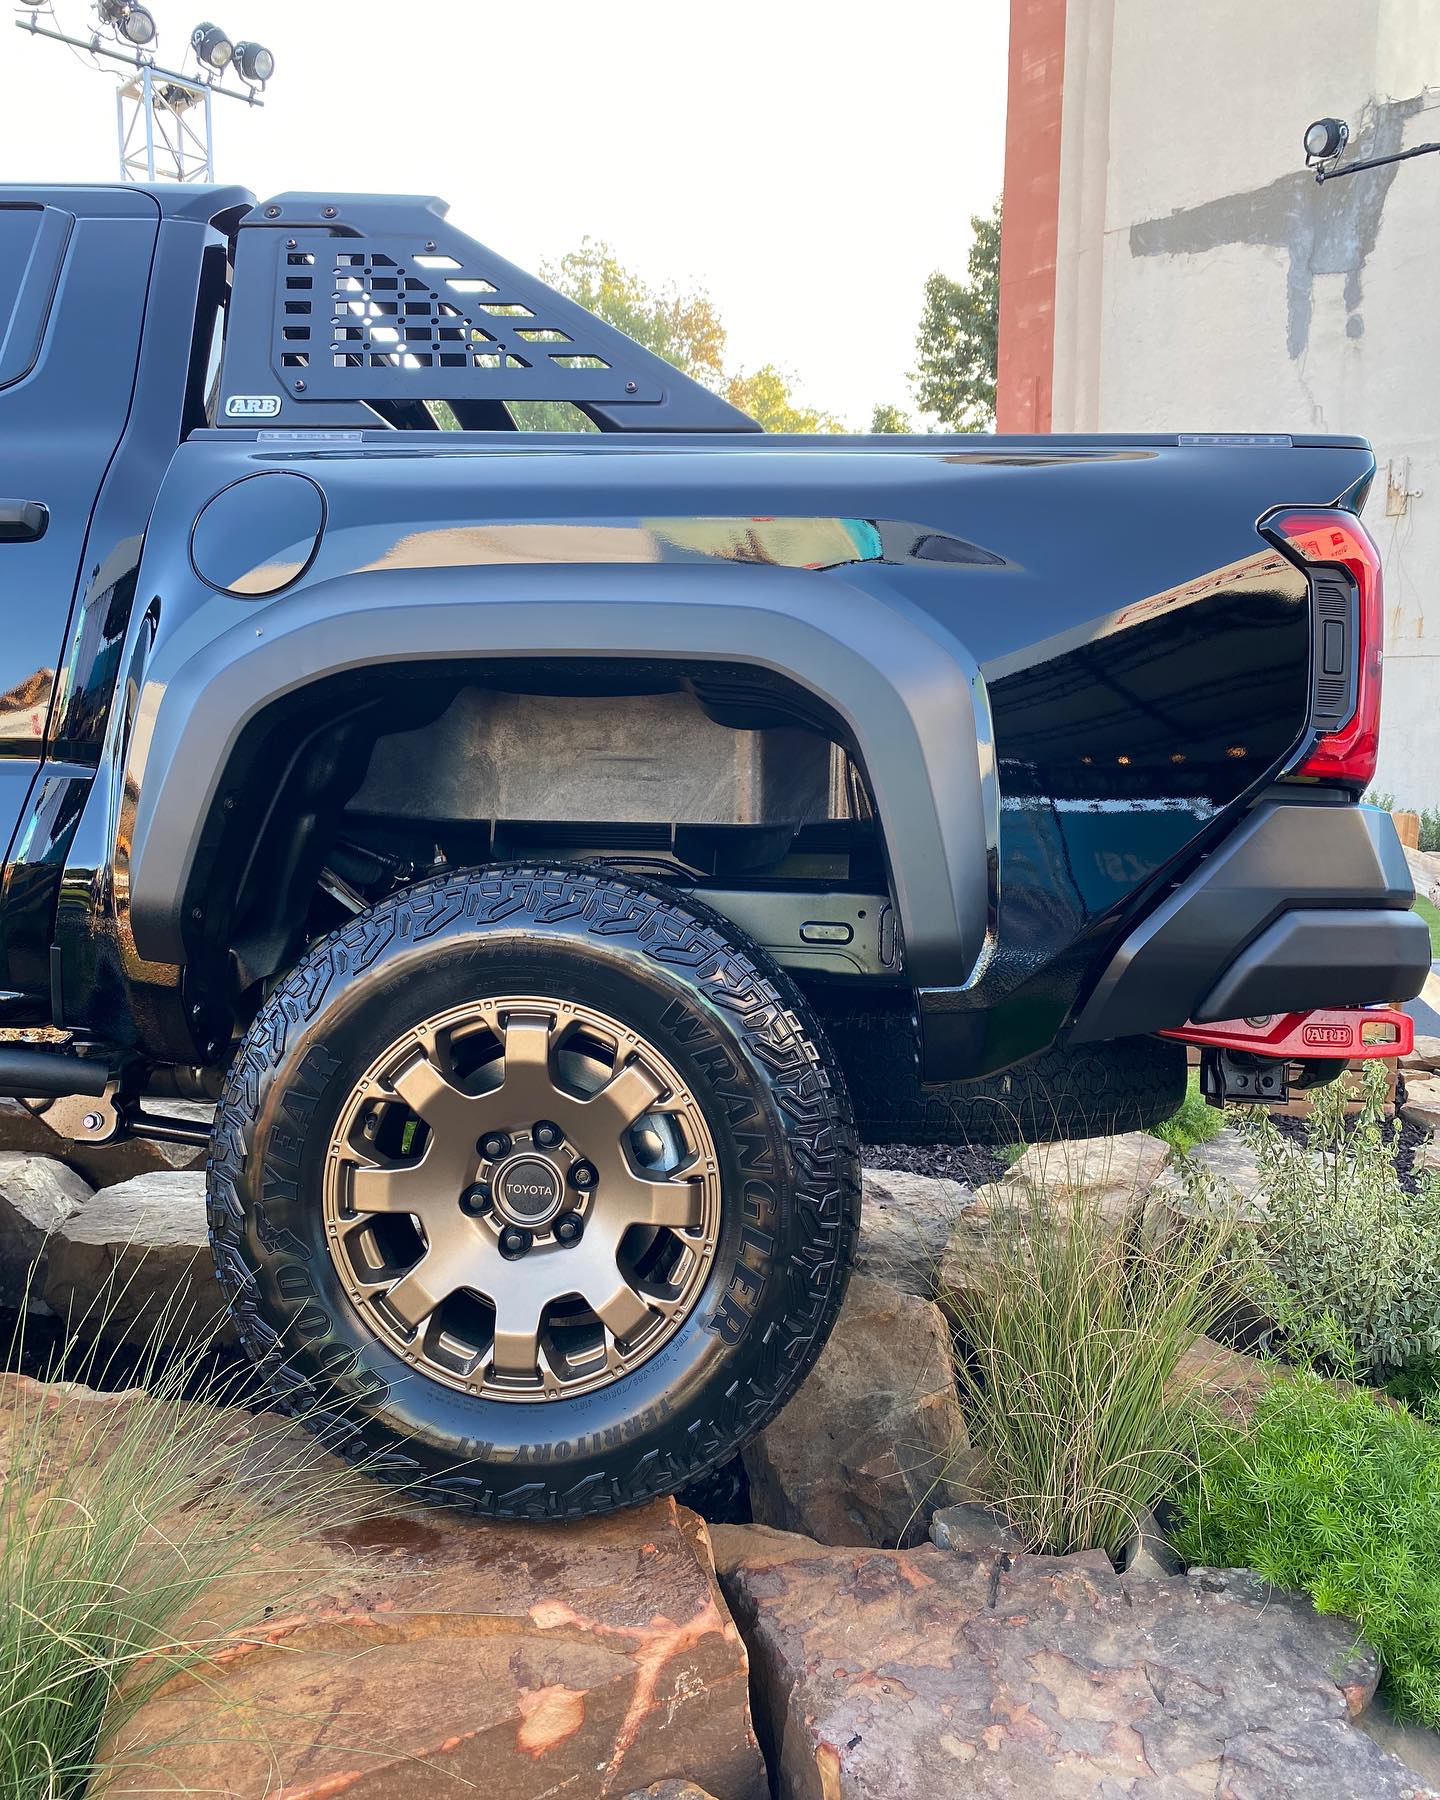 2024 Tacoma First Look: Black 2024 Tacoma TRD Pro. + Trailhunters in Black and Bronze Oxide Short Bed🤩 383950929_18247492756205066_2939052041447918777_n